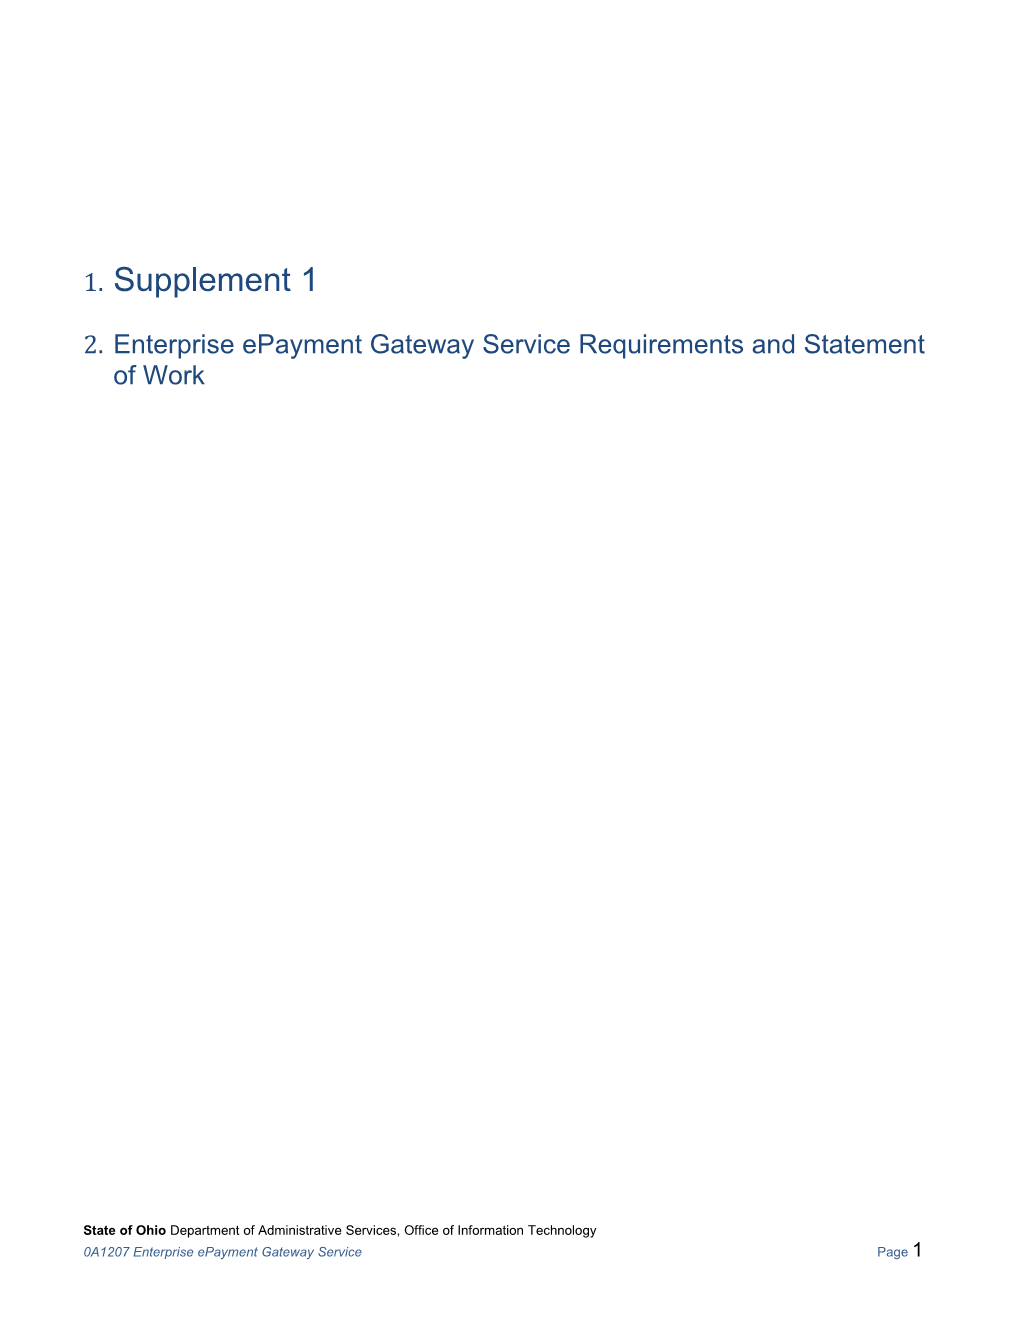 Enterprise Epaymentgateway Service Requirements and Statement of Work